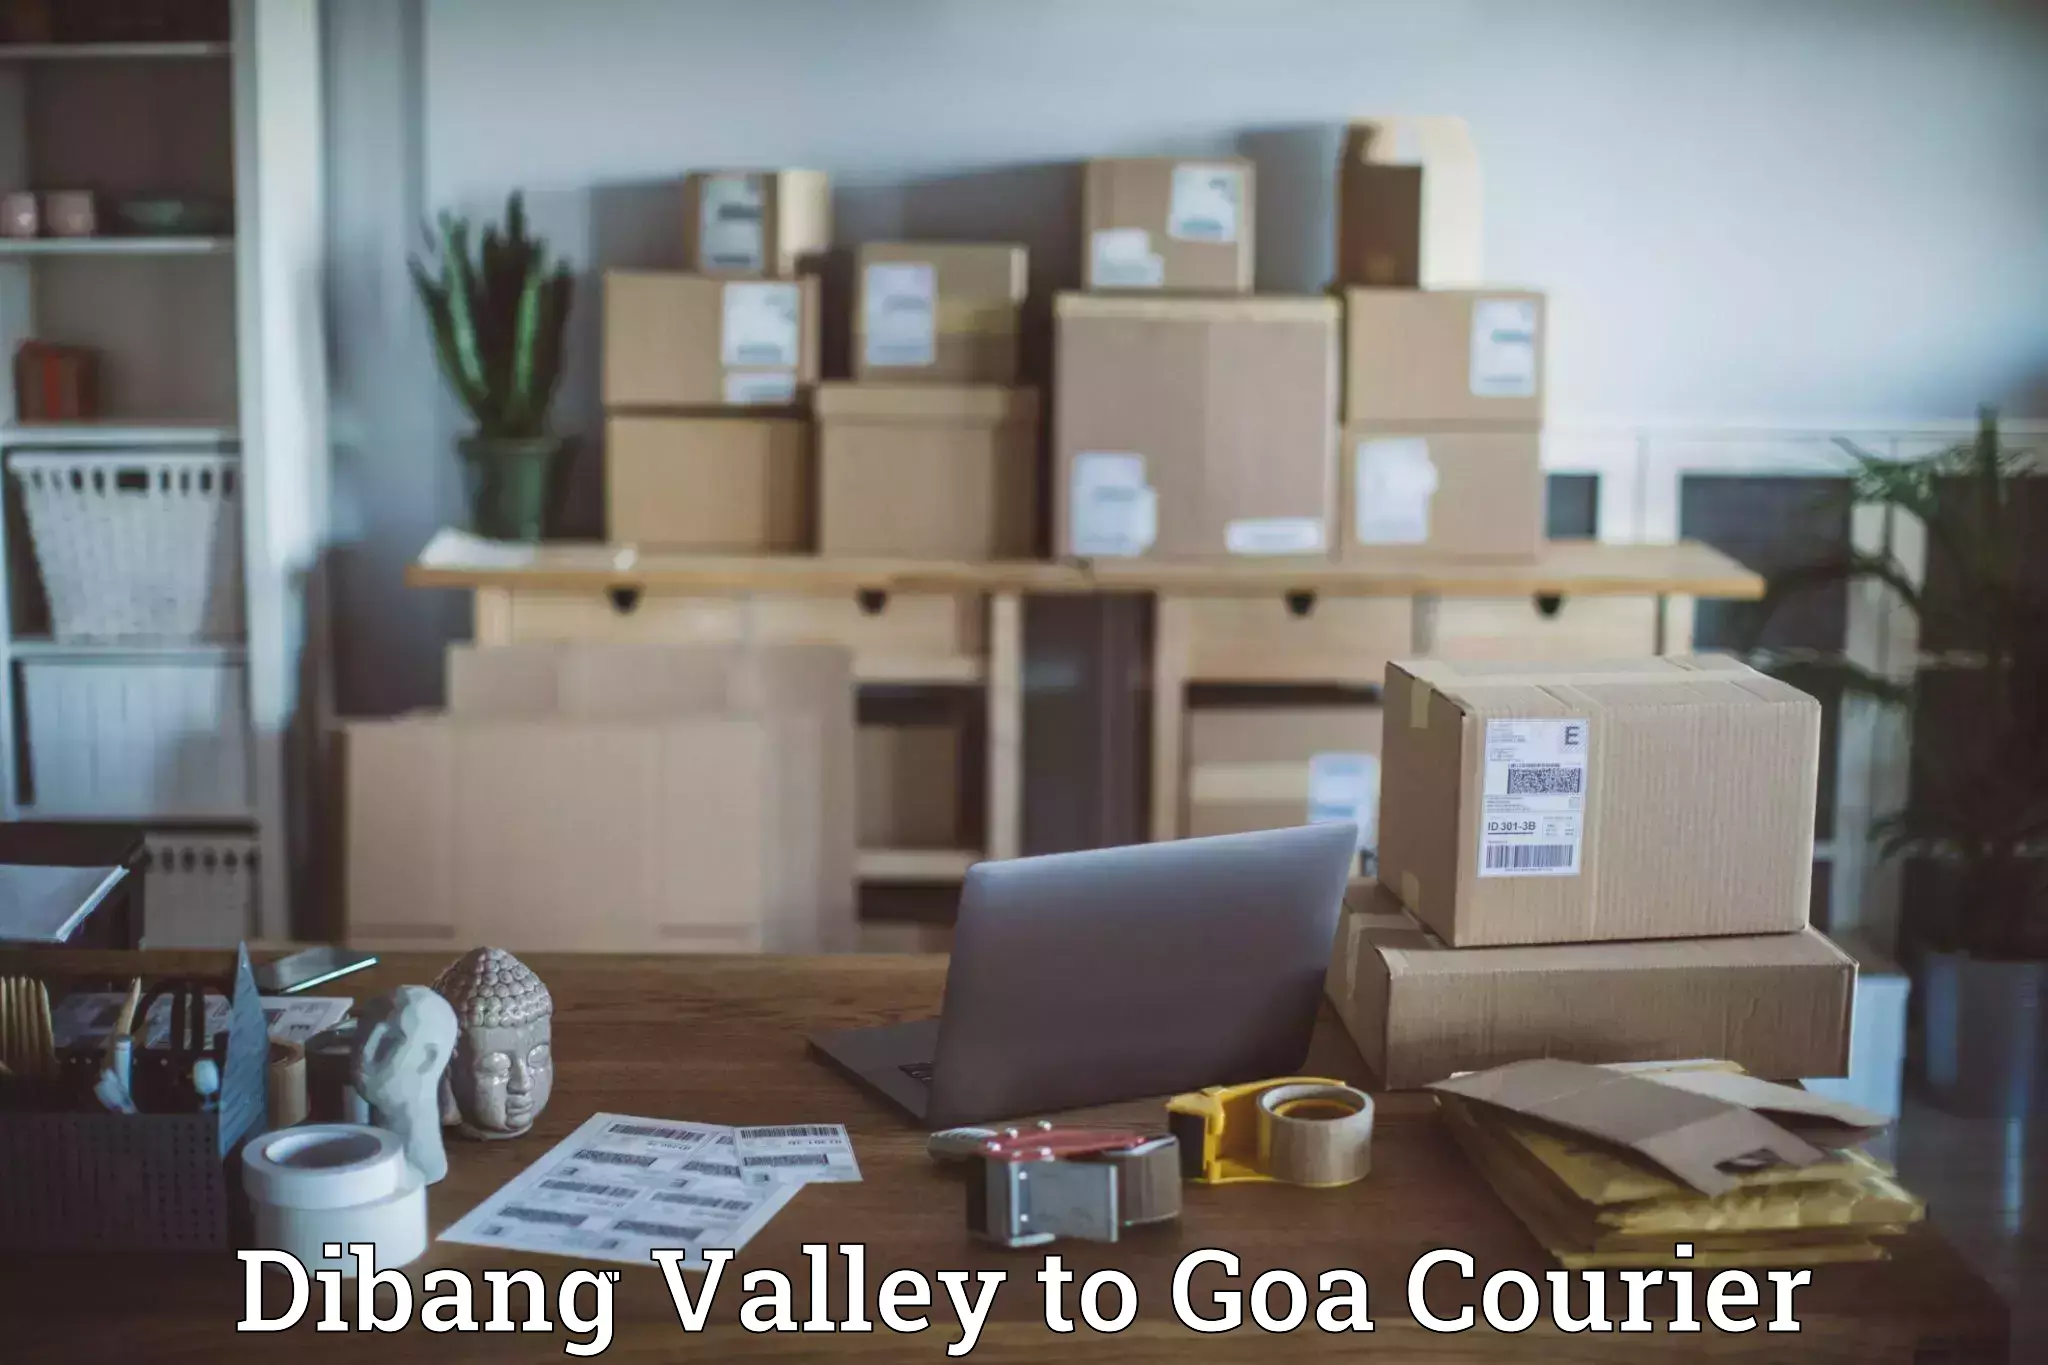 Cash on delivery service Dibang Valley to Goa